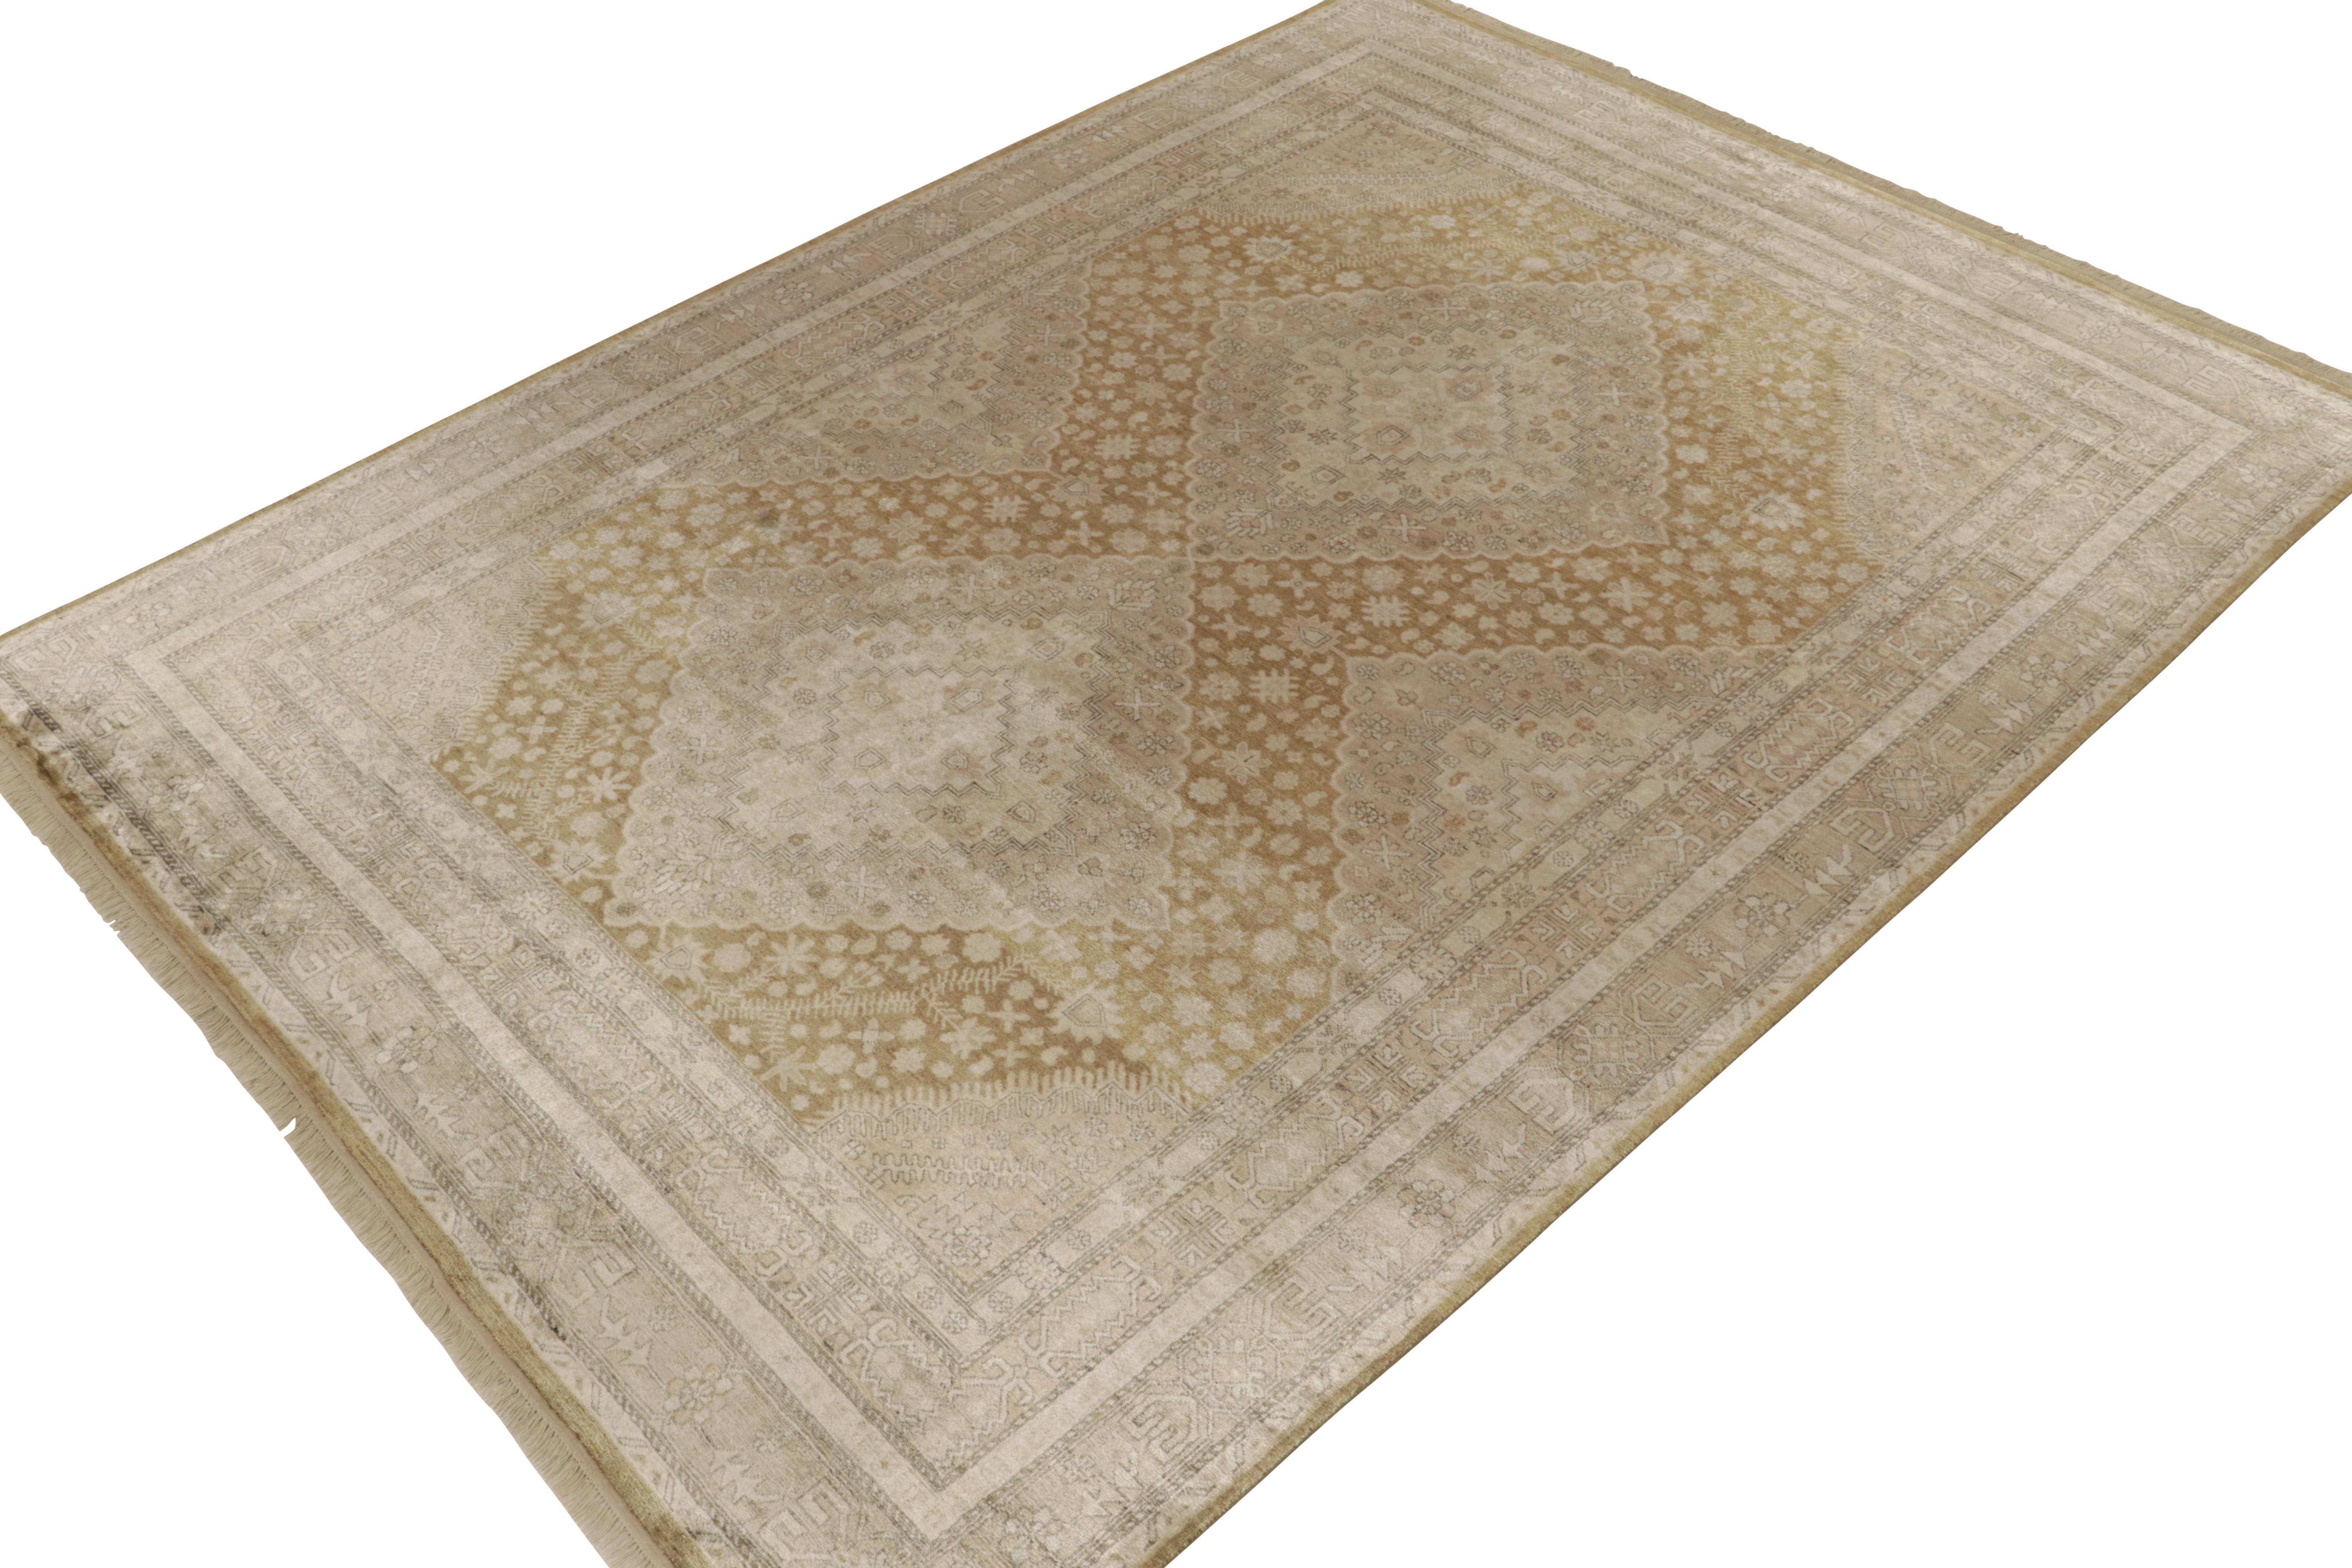 Hand-knotted in luxurious silk, this 9x12 contemporary rug from our Modern Classics collection marries a unique array of regal inspirations. Marrying Khotan and Moroccan sensibilities, the pattern harmonizes diamond and trellises with meticulous